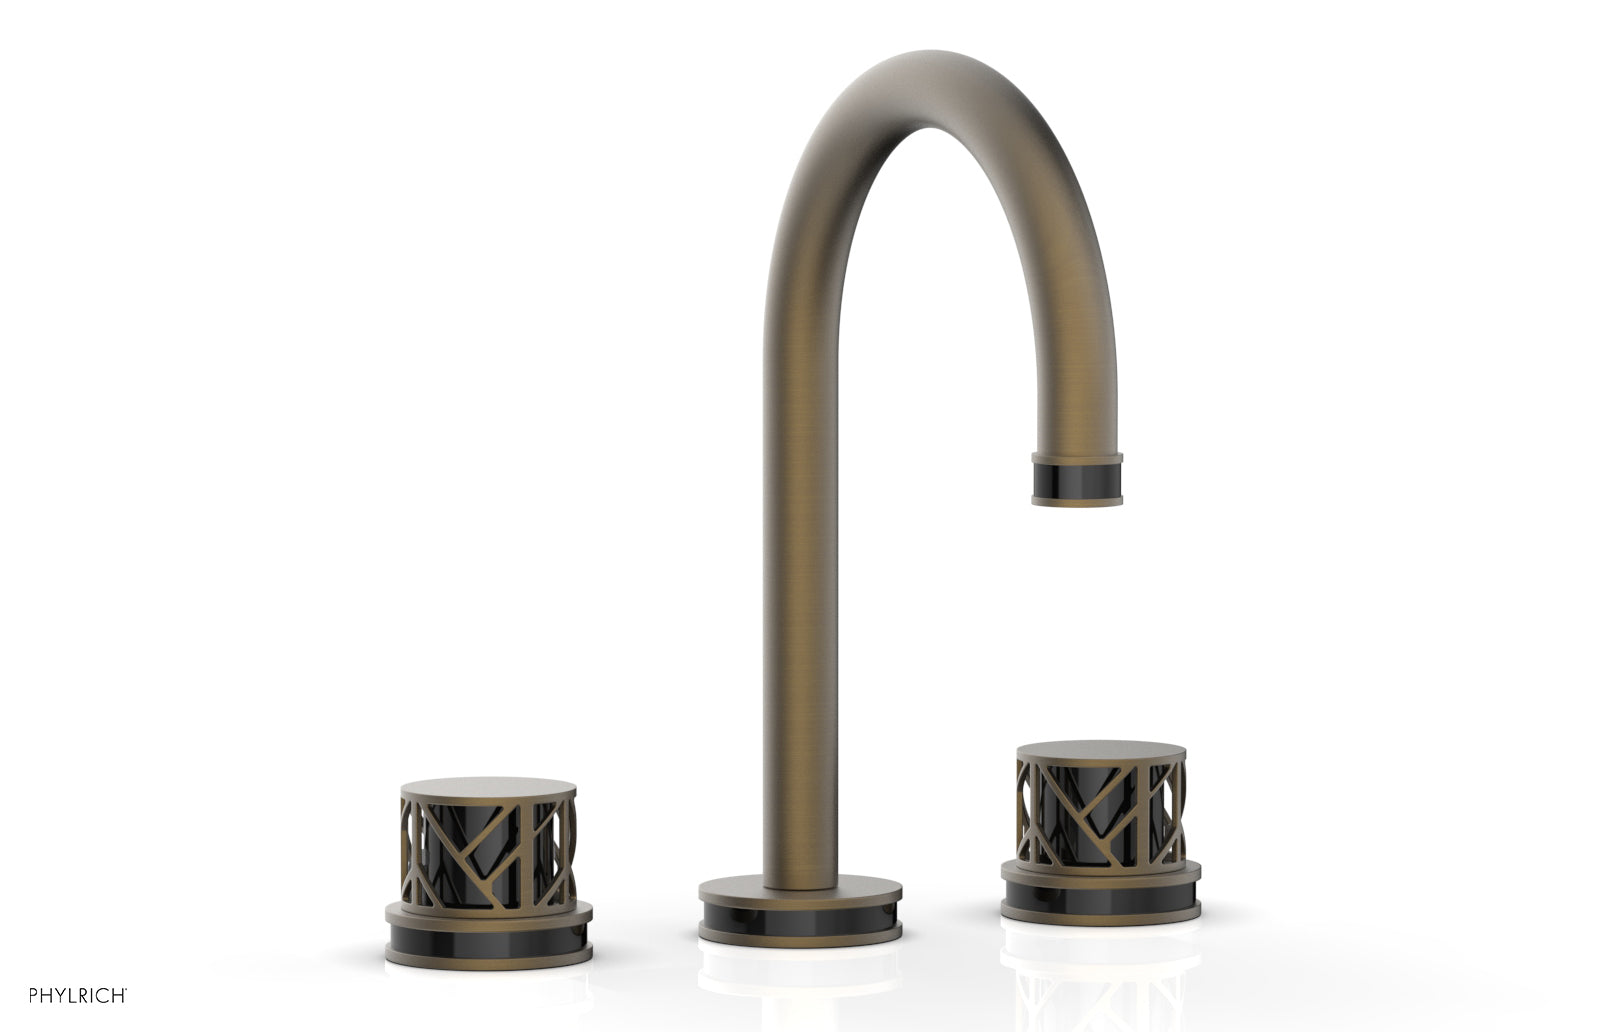 Phylrich JOLIE Widespread Faucet - Round Handles with "Black" Accents